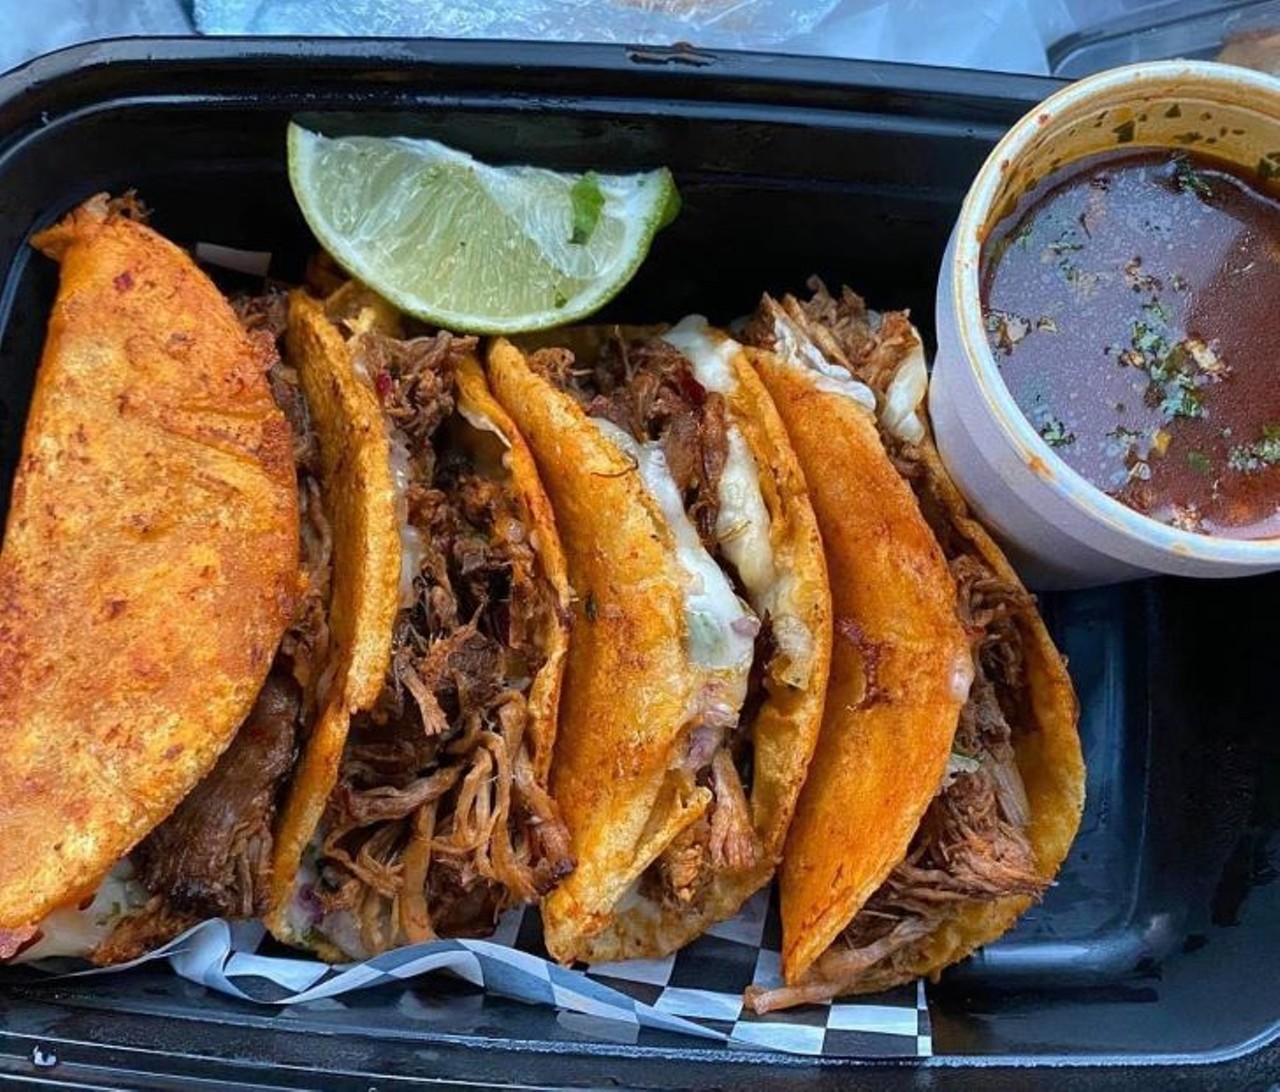 La Eskinna 
Food truck, 1826 Saturn Blvd. 
La Eskinna&#146;s specialty includes their version of tacos de birria, a pan-fried corn tortilla that&#146;s filled with melted cheese and braised meat. To dip or not to dip? We&#146;ll leave that up to you.. 
Photo via La Eskinna/Facebook